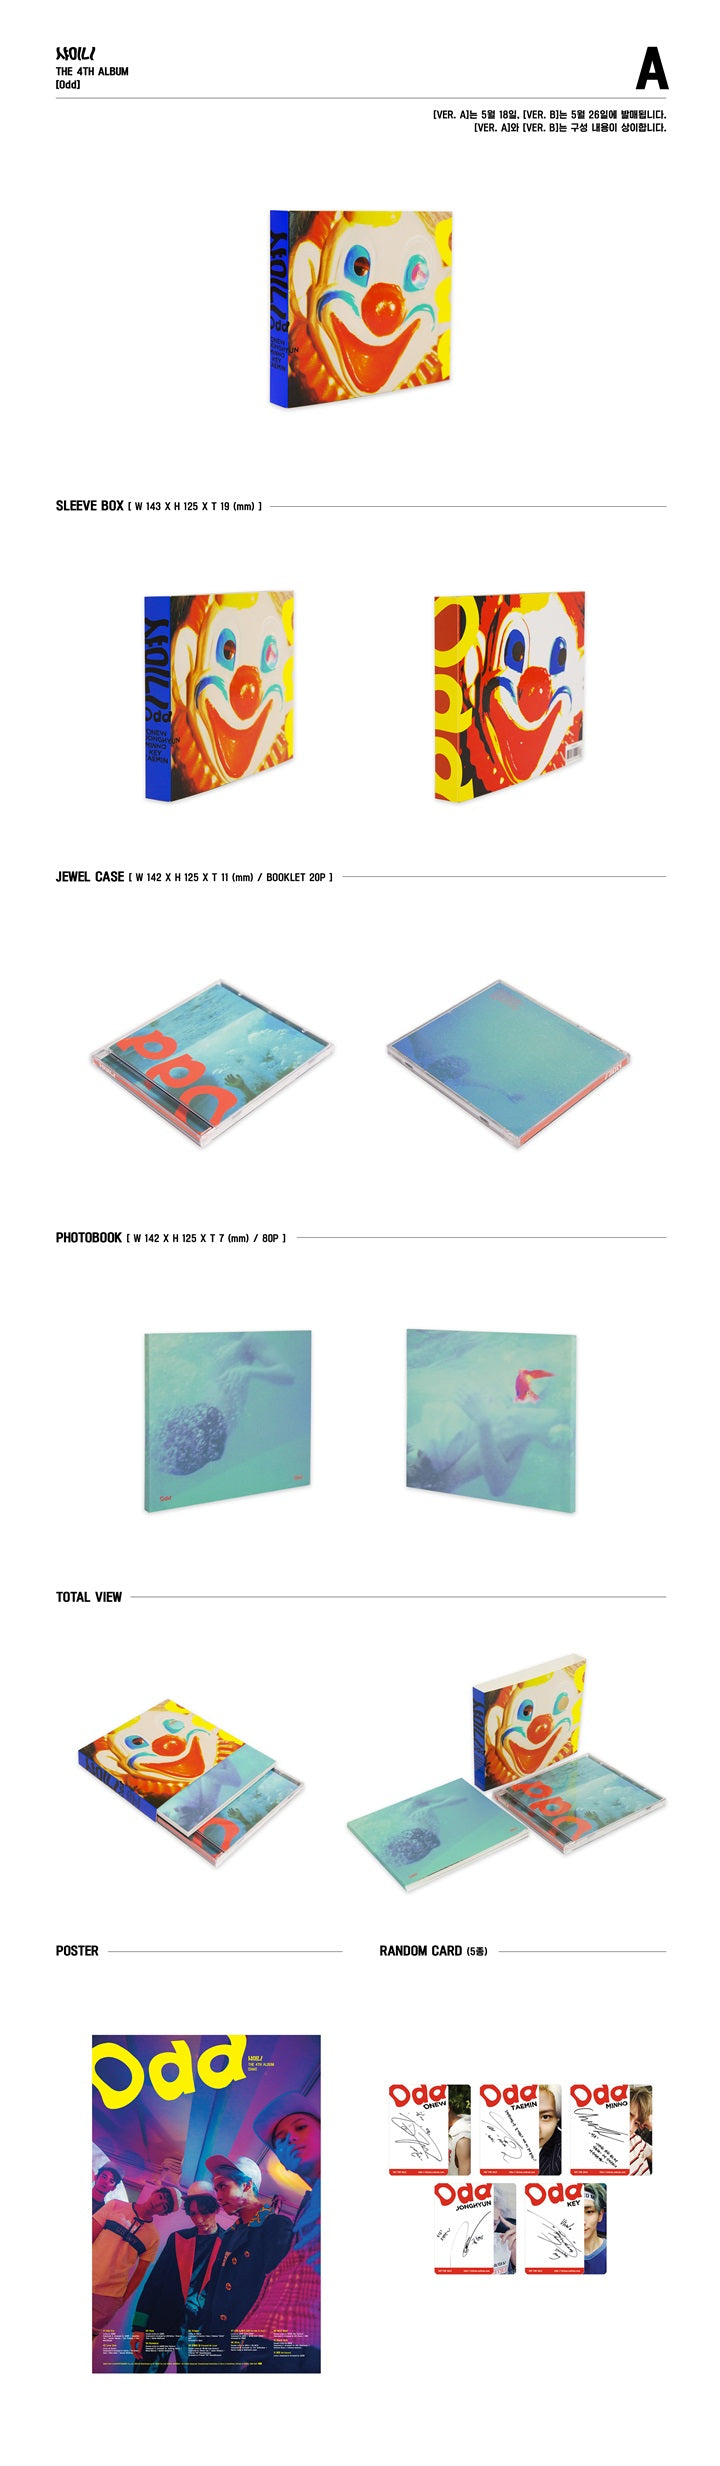 1 CD
1 Photo Book (80 pages)
1 Card (random out of 5 types)